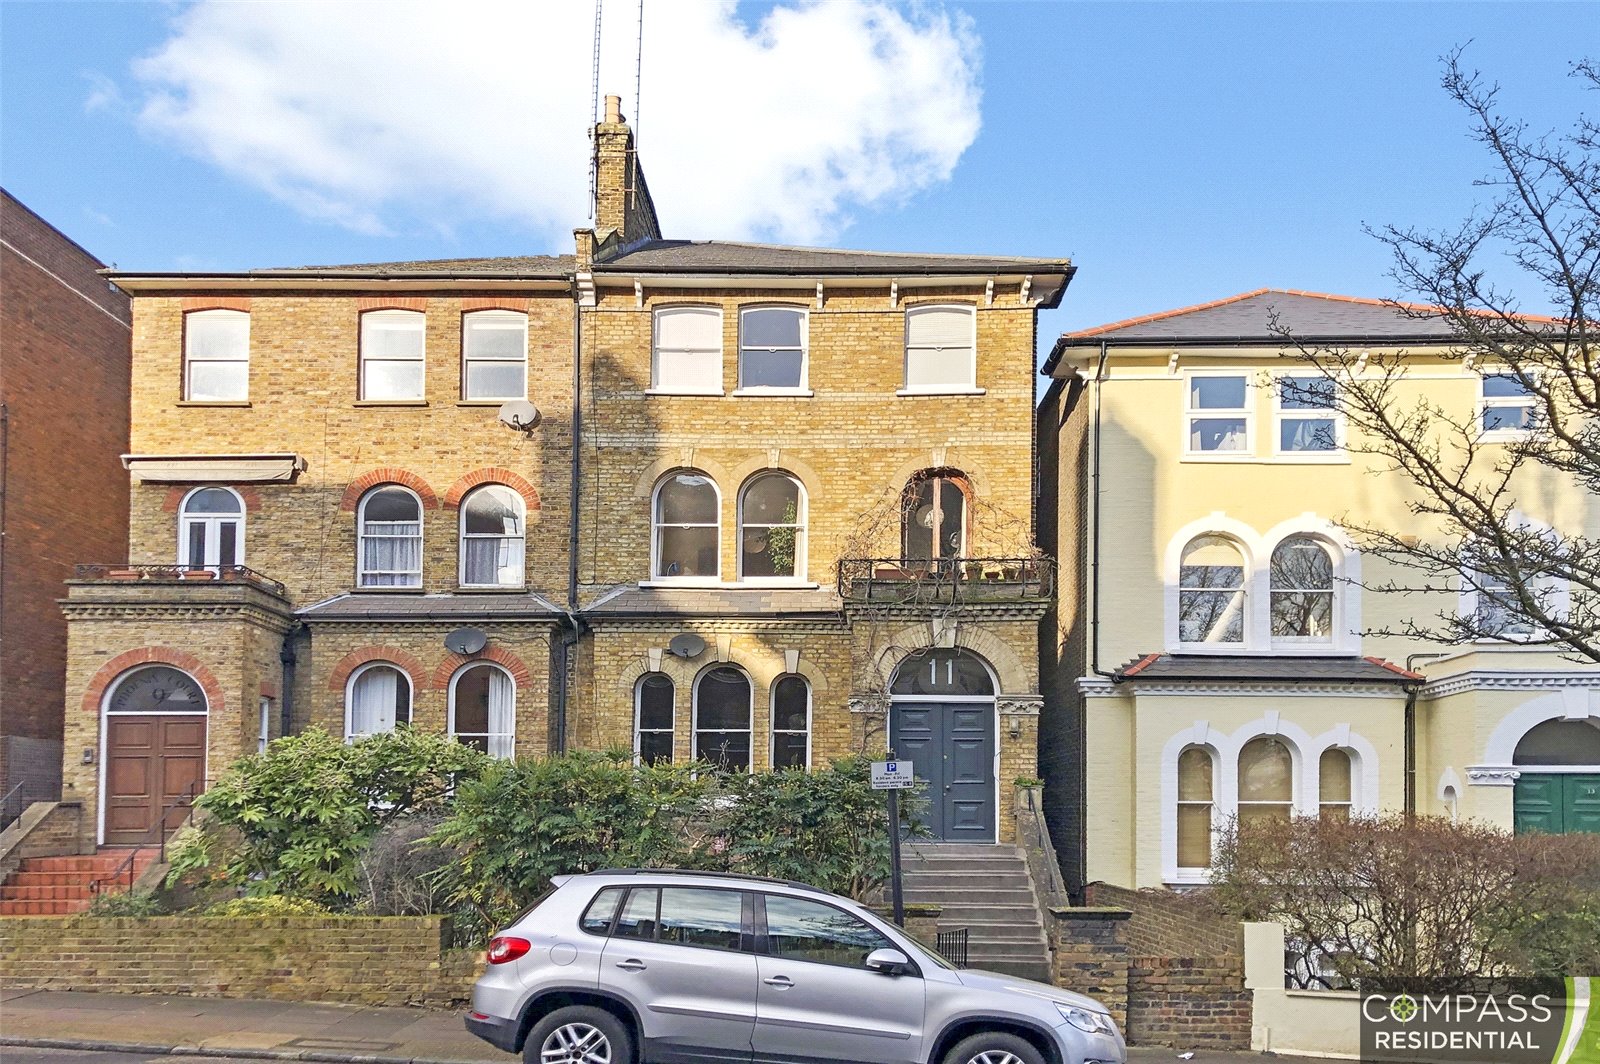 3 bed  to rent in Anson Road, Tufnell Park, N7 0